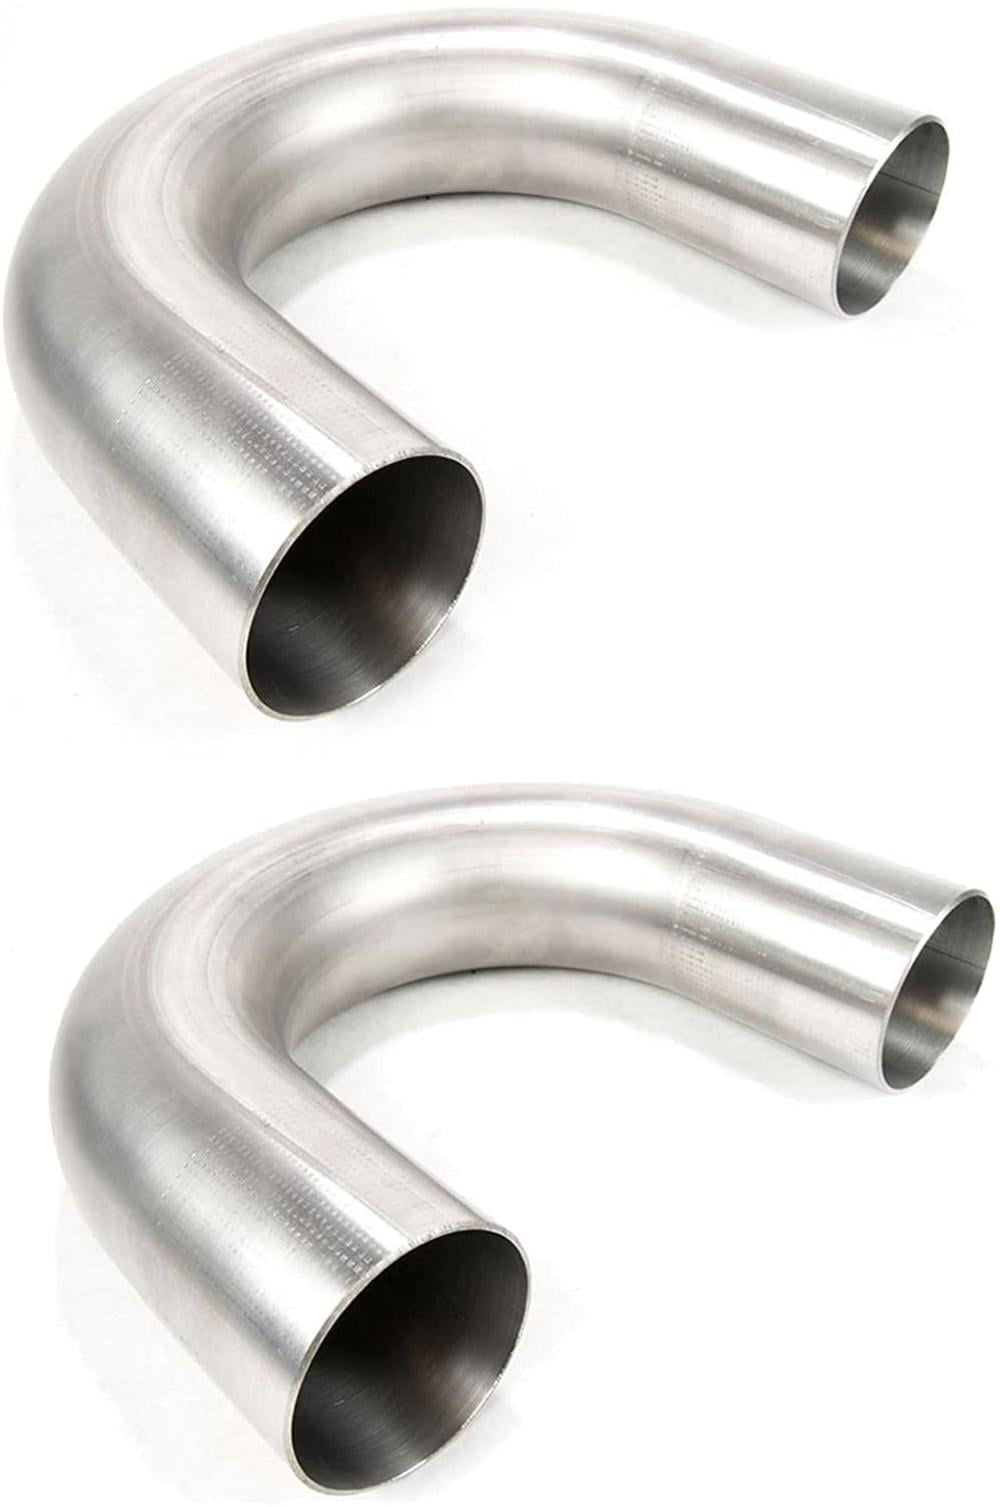 Details about   2x Squirrelly 3inch 180 Degree U 304 Stainless Steel Mandrel Bend Piping Exhaust 